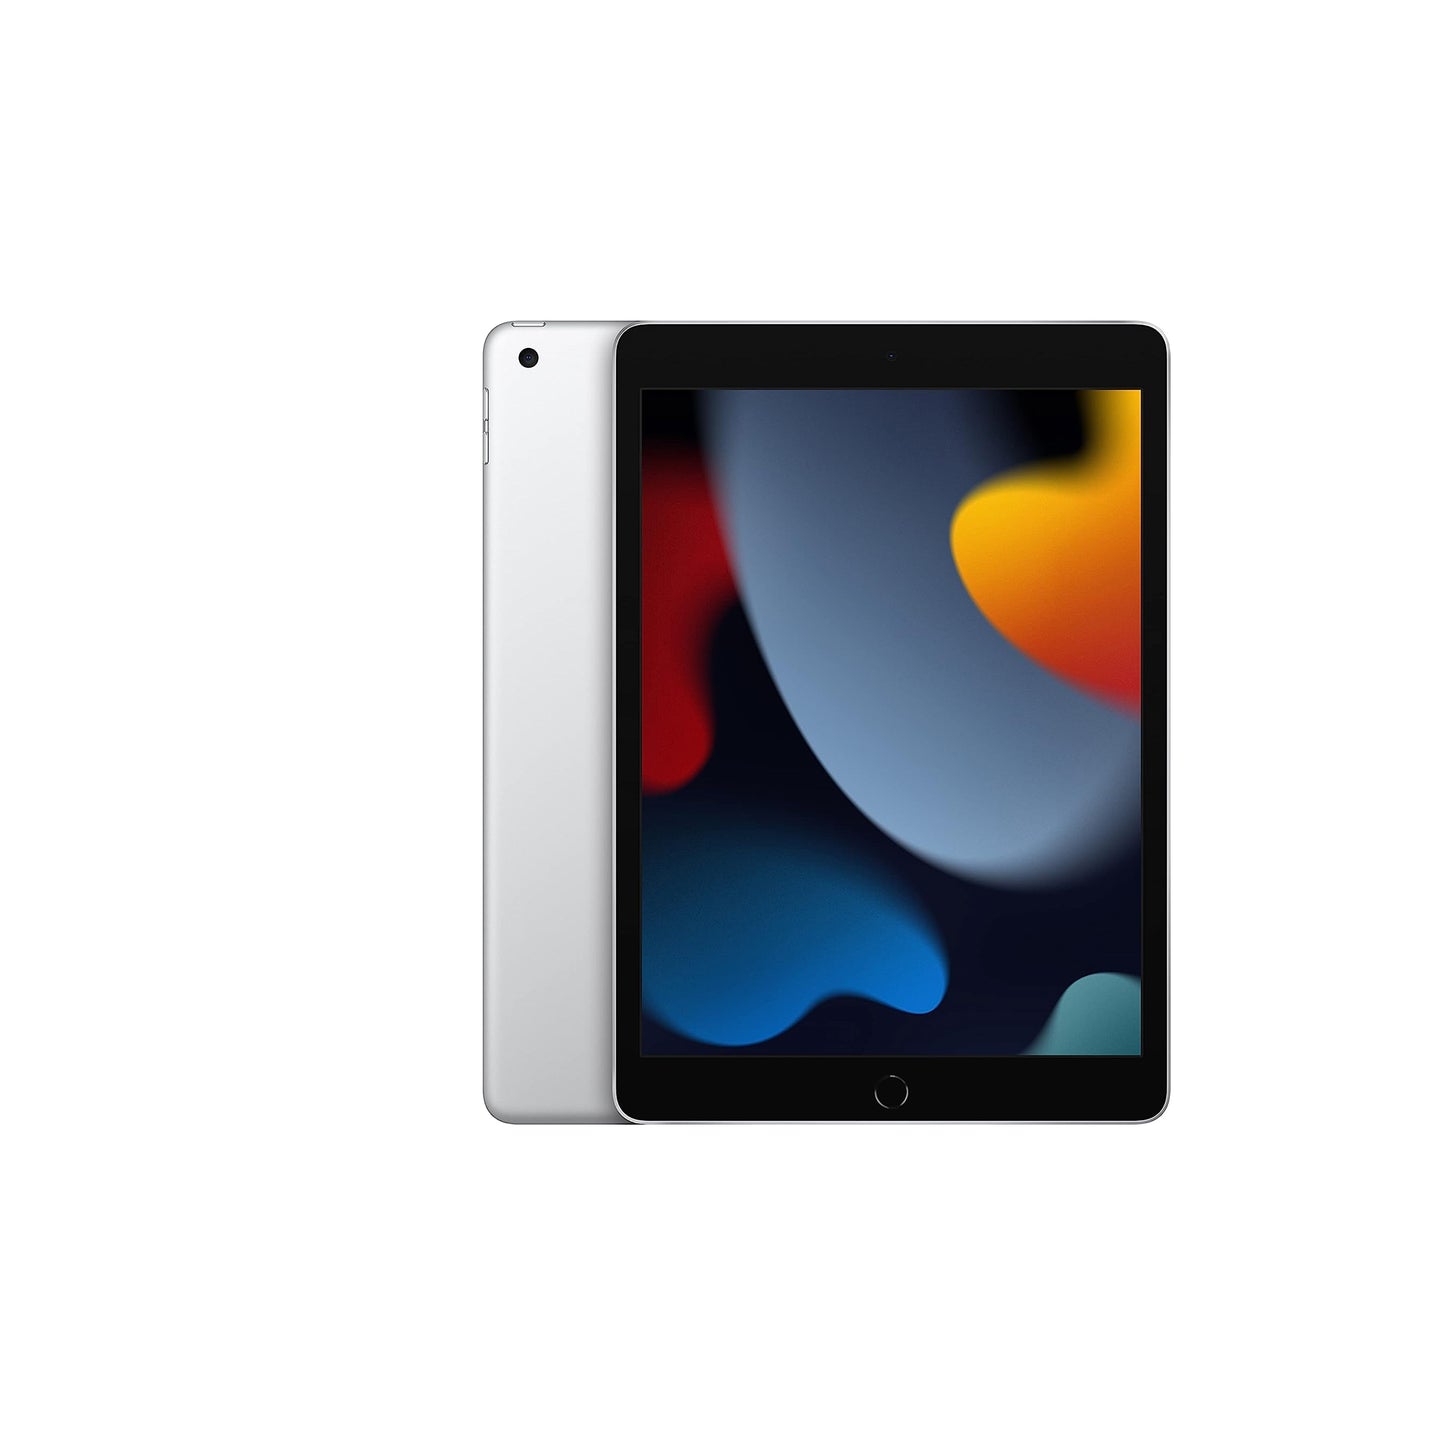 Apple iPad (9th Generation): with A13 Bionic chip, 10.2-inch Retina Display, 256GB, Wi-Fi, 12MP front/8MP Back Camera, Touch ID, All-Day Battery Life – Silver